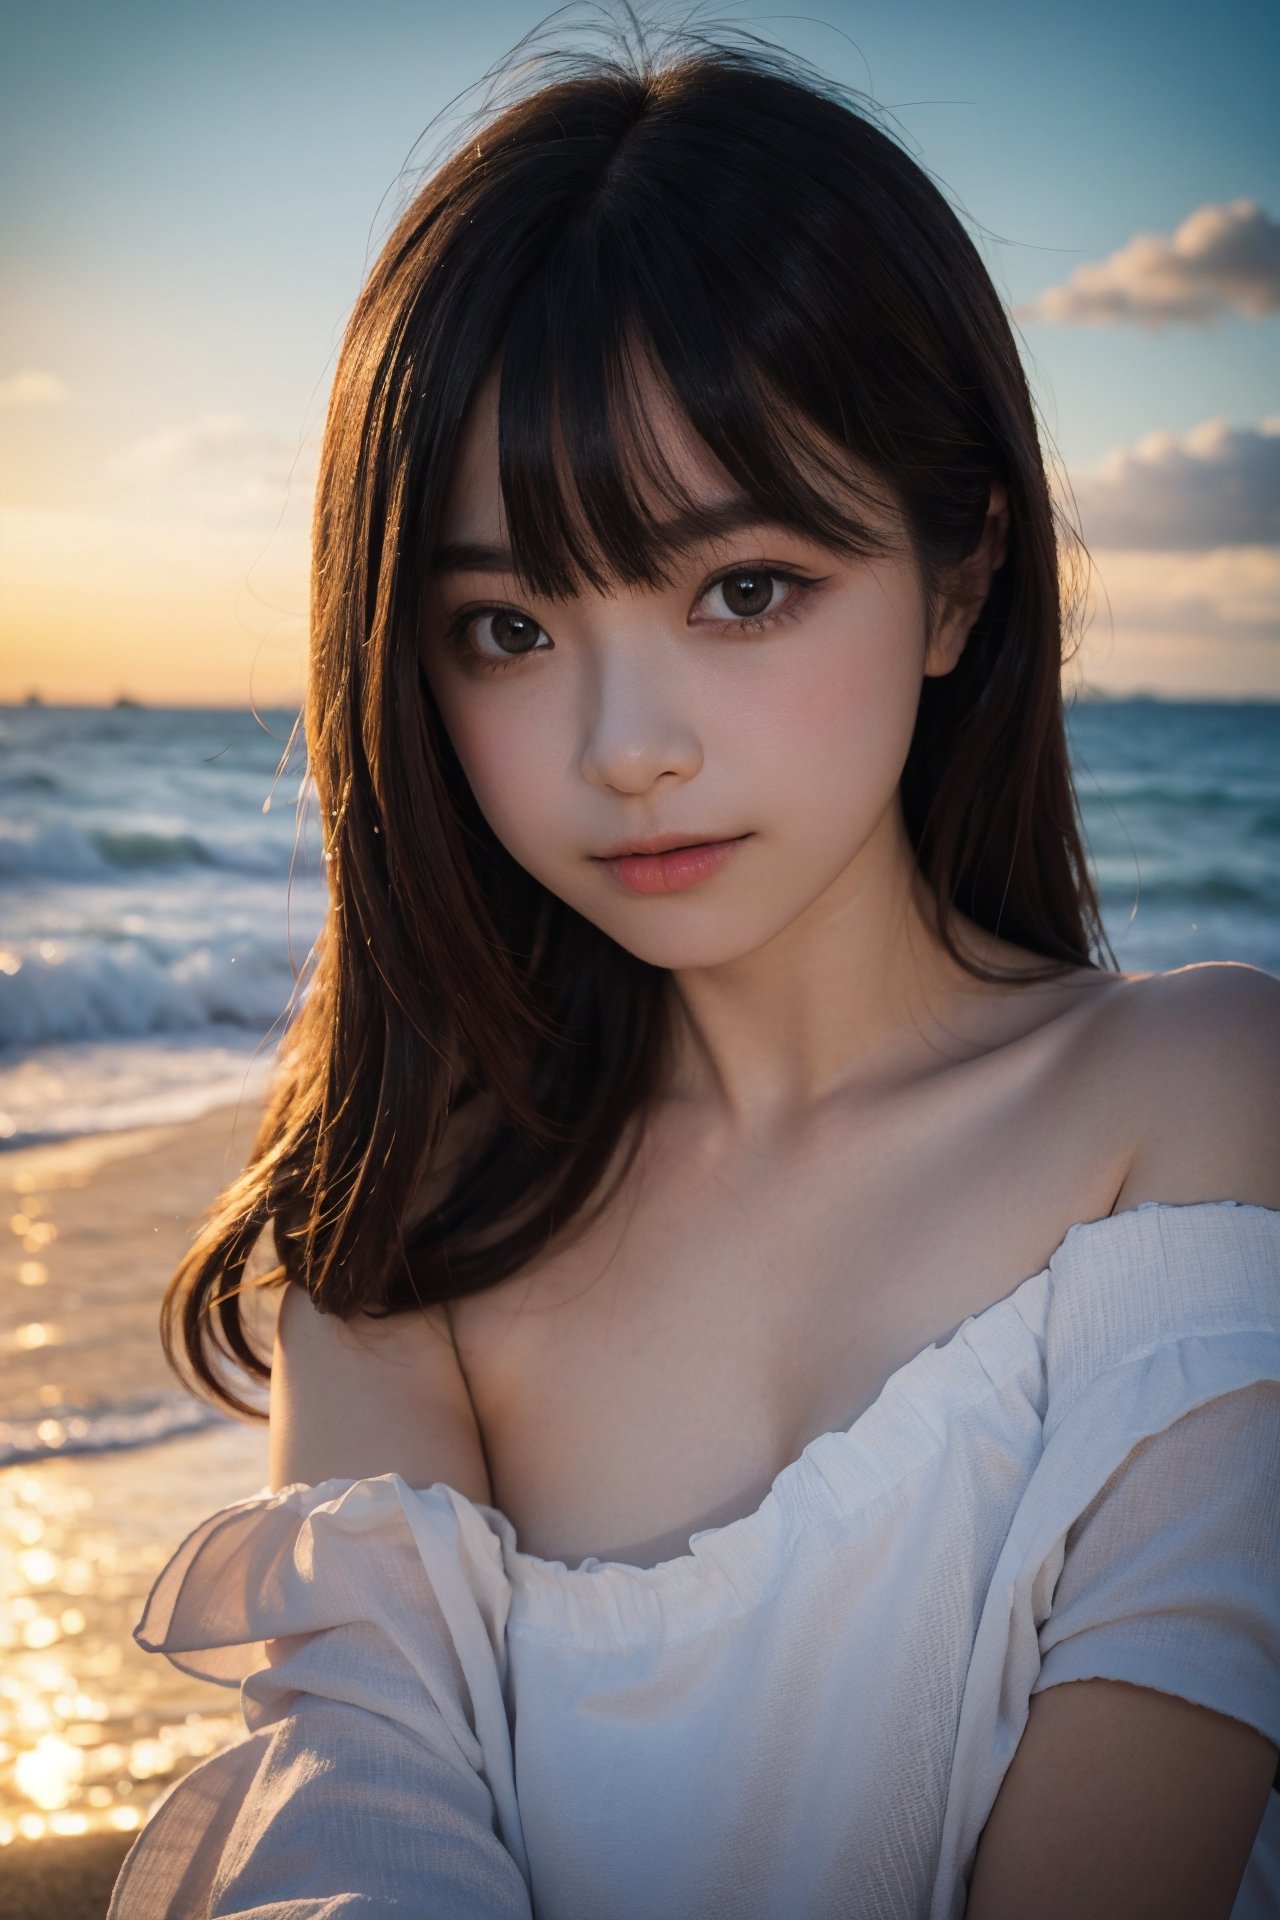 1Beautiful girl, extremely detailed CG unified 8k wallpaper, highly detailed, High-definition raw color photos, professional photograpy, Realistic portrait, teenager, brunette, long hair, off shoulder, Outdoors, coast, ocean, palm trees, beautiful sunset,53yfp